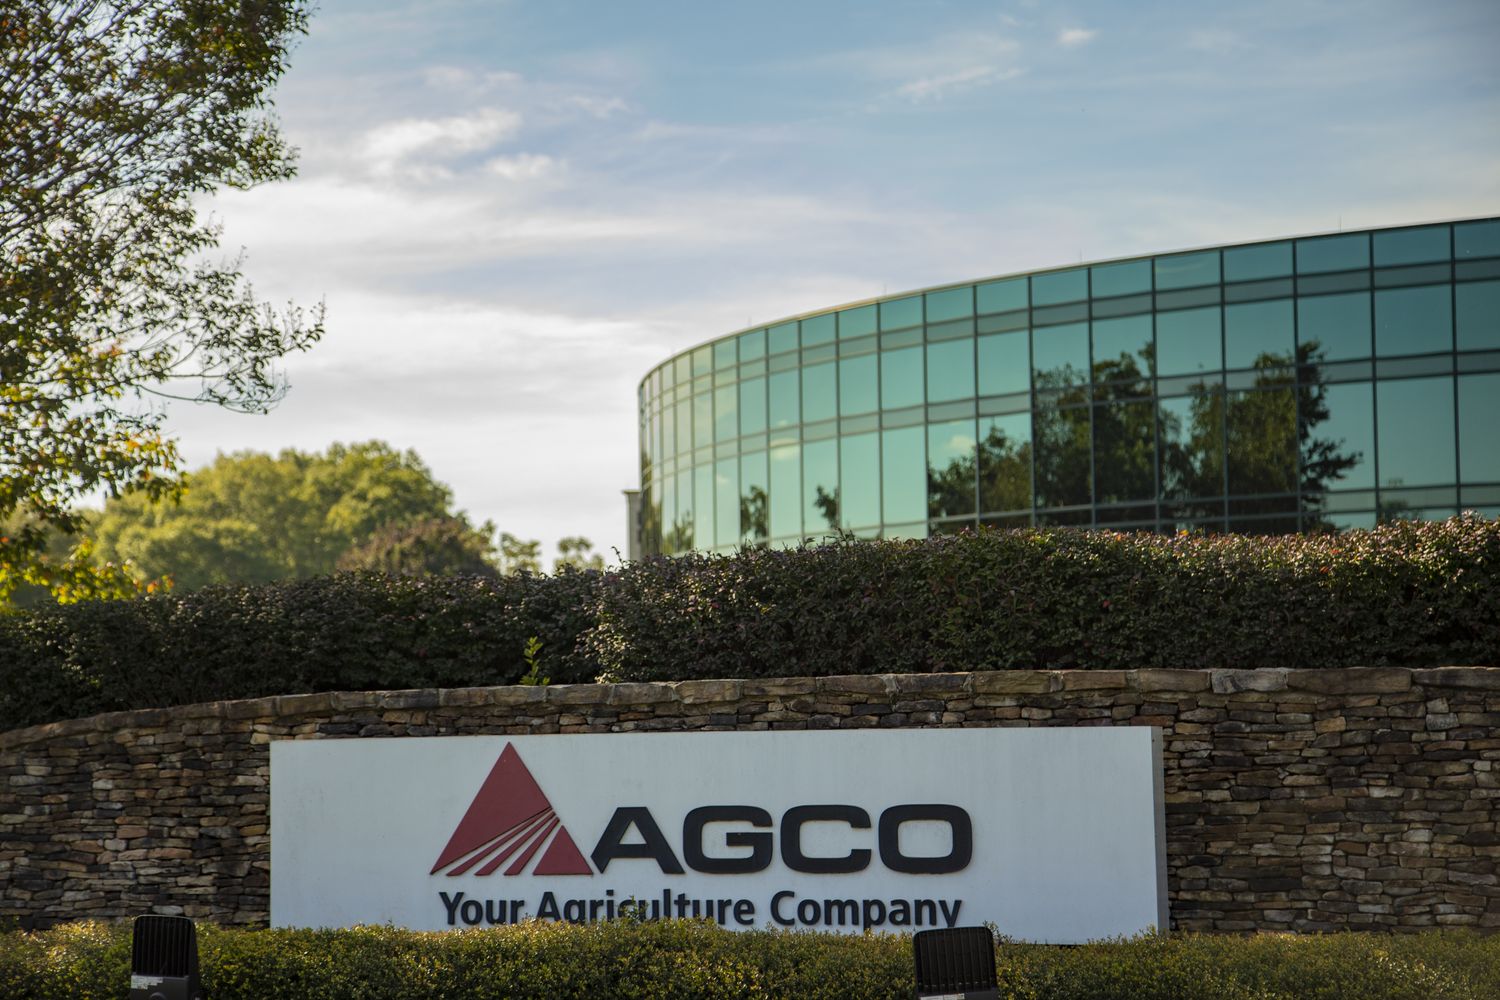 AGCO Continues Technology Transformation to Become an Industry Leader in Smart Farming Solutions